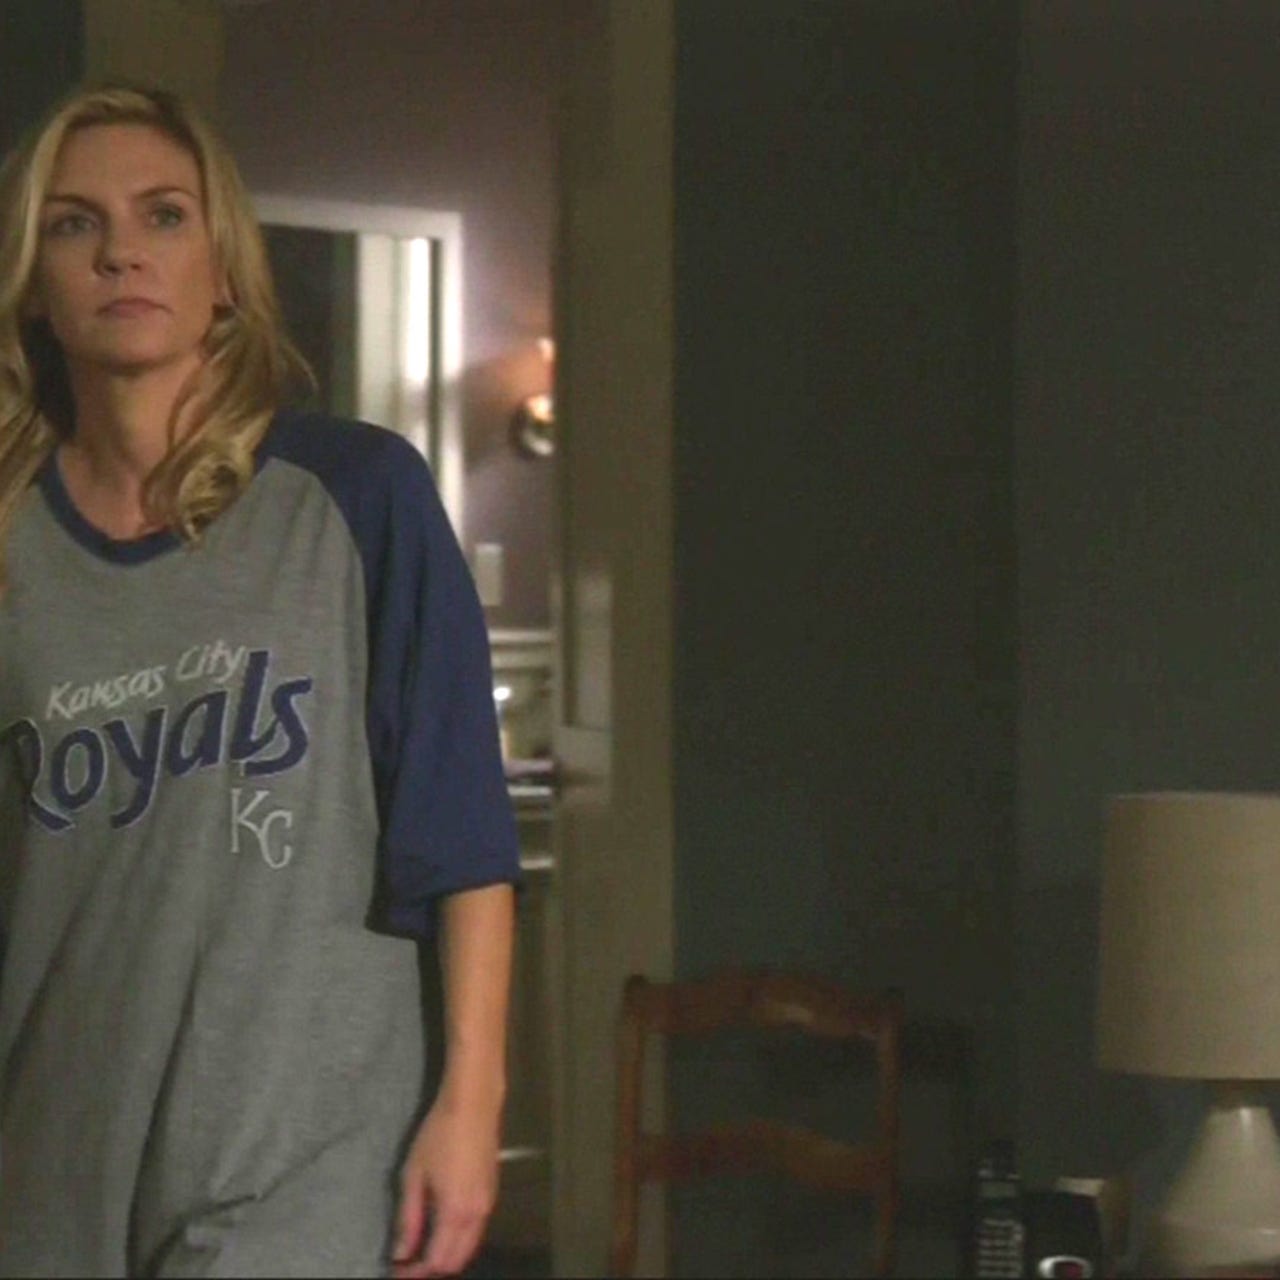 Kim from 'Better Call Saul' in a Royals T-shirt? Here's one theory